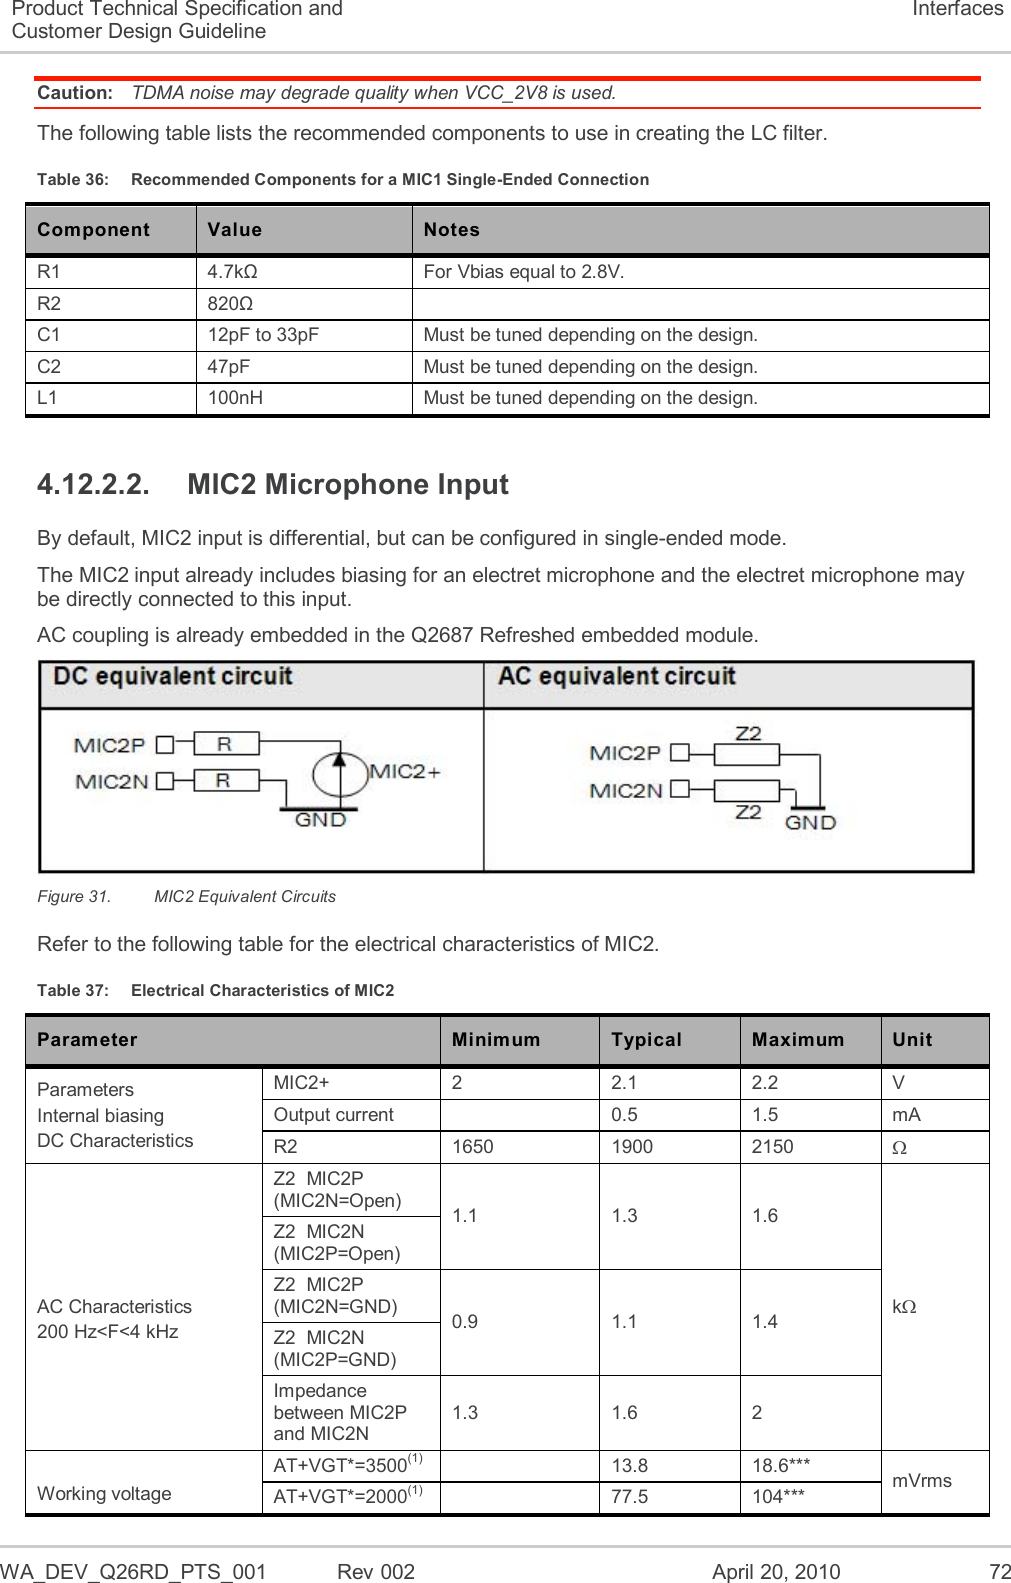  WA_DEV_Q26RD_PTS_001  Rev 002  April 20, 2010 72 Product Technical Specification and Customer Design Guideline Interfaces Caution:  TDMA noise may degrade quality when VCC_2V8 is used. The following table lists the recommended components to use in creating the LC filter. Table 36:  Recommended Components for a MIC1 Single-Ended Connection Component Value Notes R1 4.7kΩ For Vbias equal to 2.8V. R2 820Ω  C1 12pF to 33pF Must be tuned depending on the design. C2 47pF Must be tuned depending on the design. L1 100nH Must be tuned depending on the design. 4.12.2.2.  MIC2 Microphone Input By default, MIC2 input is differential, but can be configured in single-ended mode. The MIC2 input already includes biasing for an electret microphone and the electret microphone may be directly connected to this input. AC coupling is already embedded in the Q2687 Refreshed embedded module.  Figure 31.  MIC2 Equivalent Circuits Refer to the following table for the electrical characteristics of MIC2. Table 37:  Electrical Characteristics of MIC2 Parameter Minimum Typical Maximum Unit Parameters Internal biasing  DC Characteristics MIC2+ 2 2.1 2.2 V Output current  0.5 1.5 mA R2 1650 1900 2150   AC Characteristics 200 Hz&lt;F&lt;4 kHz Z2  MIC2P (MIC2N=Open) 1.1 1.3 1.6 k Z2  MIC2N (MIC2P=Open) Z2  MIC2P (MIC2N=GND) 0.9 1.1 1.4 Z2  MIC2N (MIC2P=GND) Impedance between MIC2P and MIC2N 1.3 1.6 2  Working voltage  AT+VGT*=3500(1)  13.8 18.6*** mVrms AT+VGT*=2000(1)  77.5 104*** 